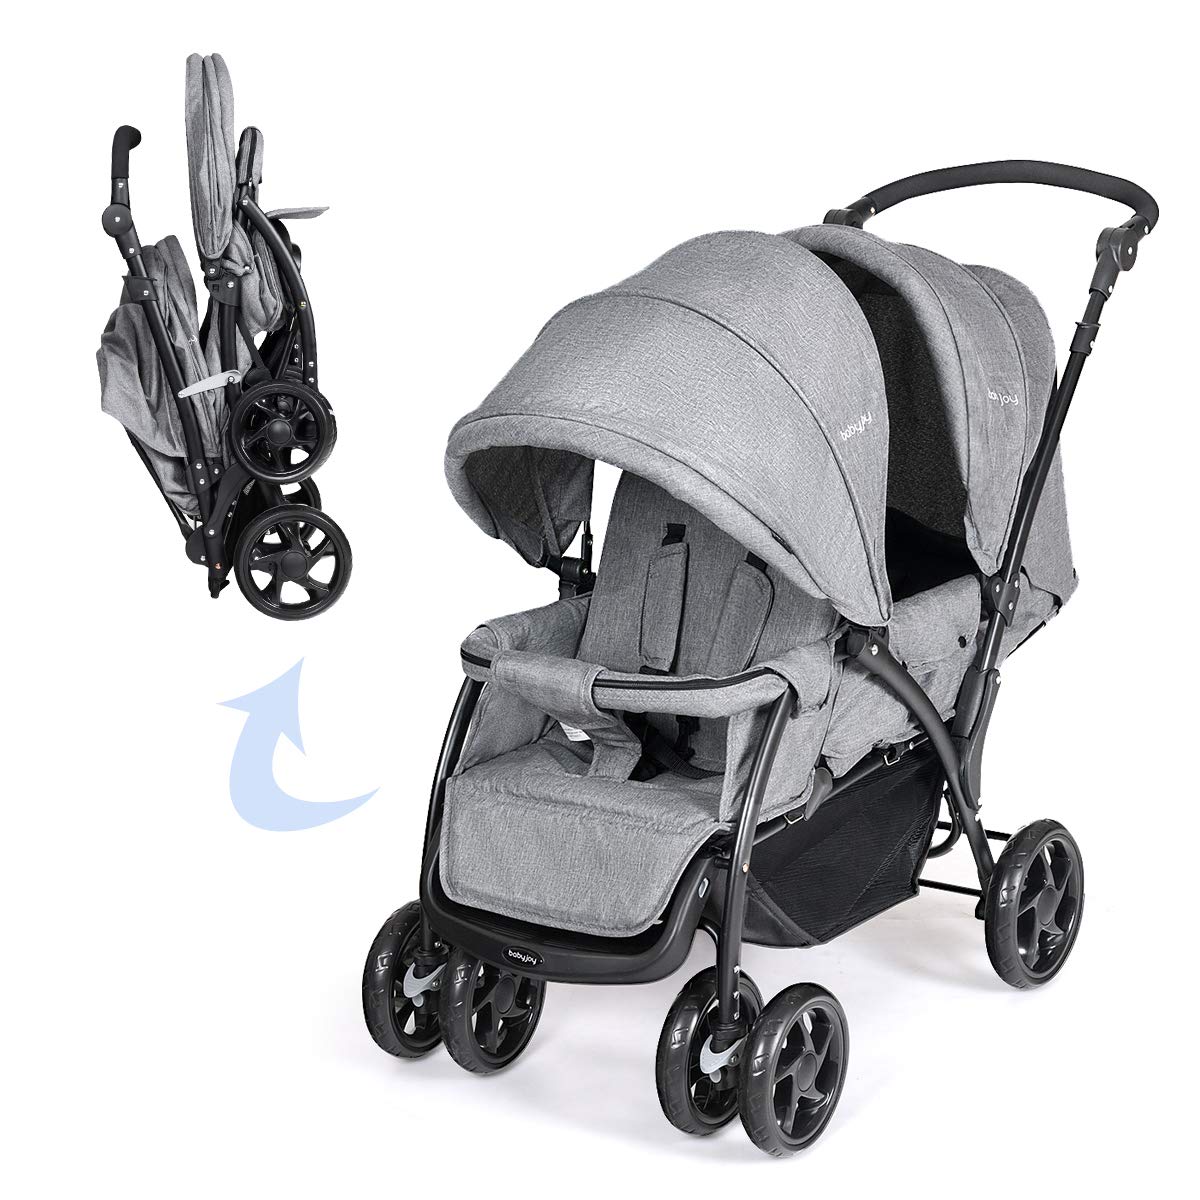 DREAMADE Twin Pushchair 2 in 1, Double Pushchair for Baby and Toddler, Foldable, Baby Pram with Double Seat, Pushchair for 2 Children, Grey